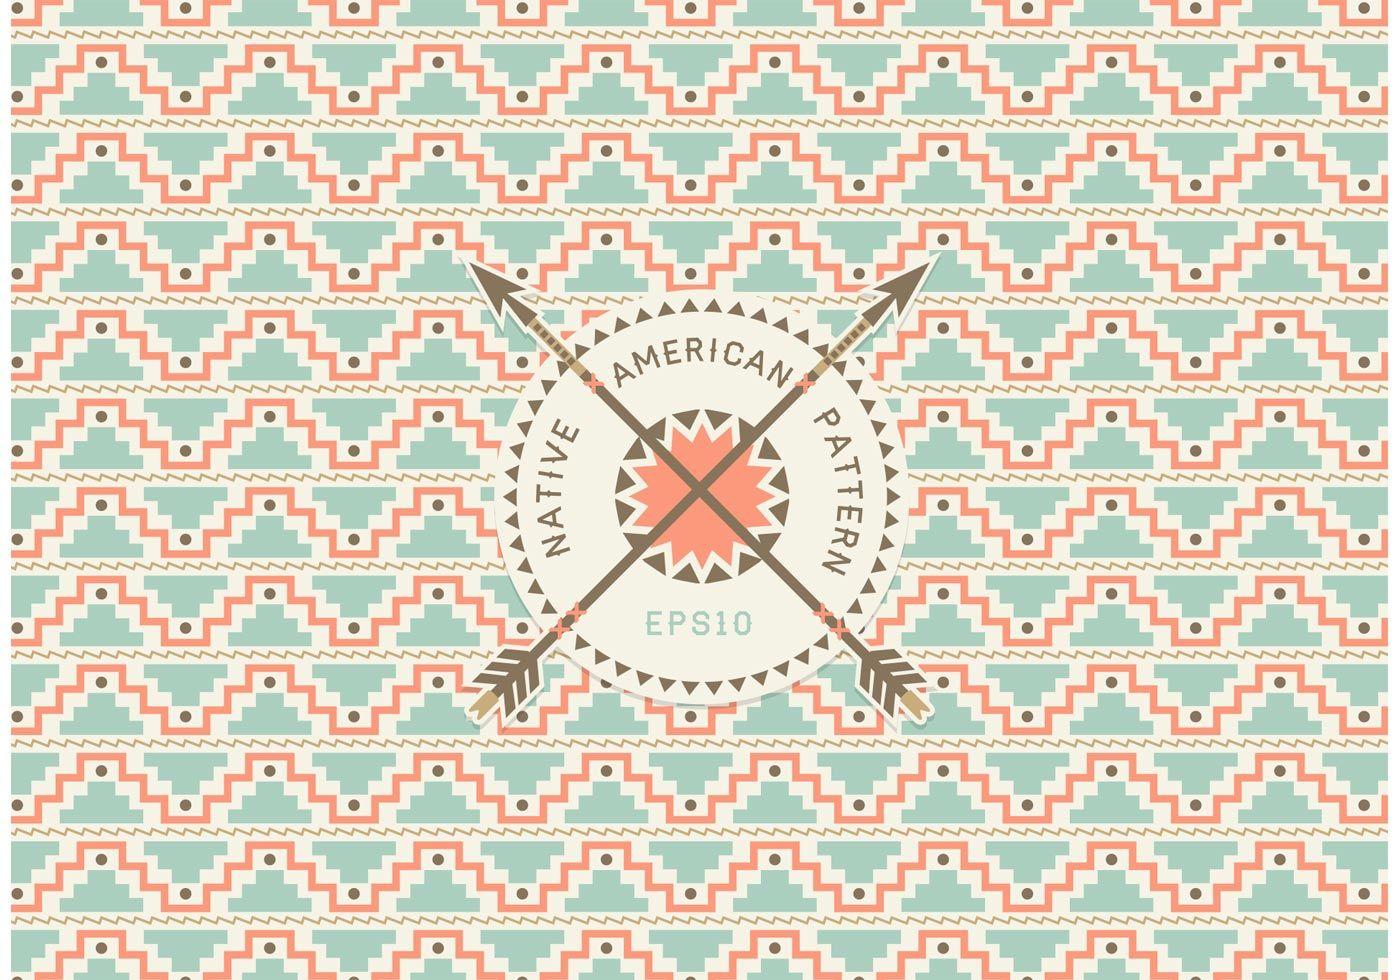 Free Native American Seamless Pattern Vector. CAMP STYLE 2016